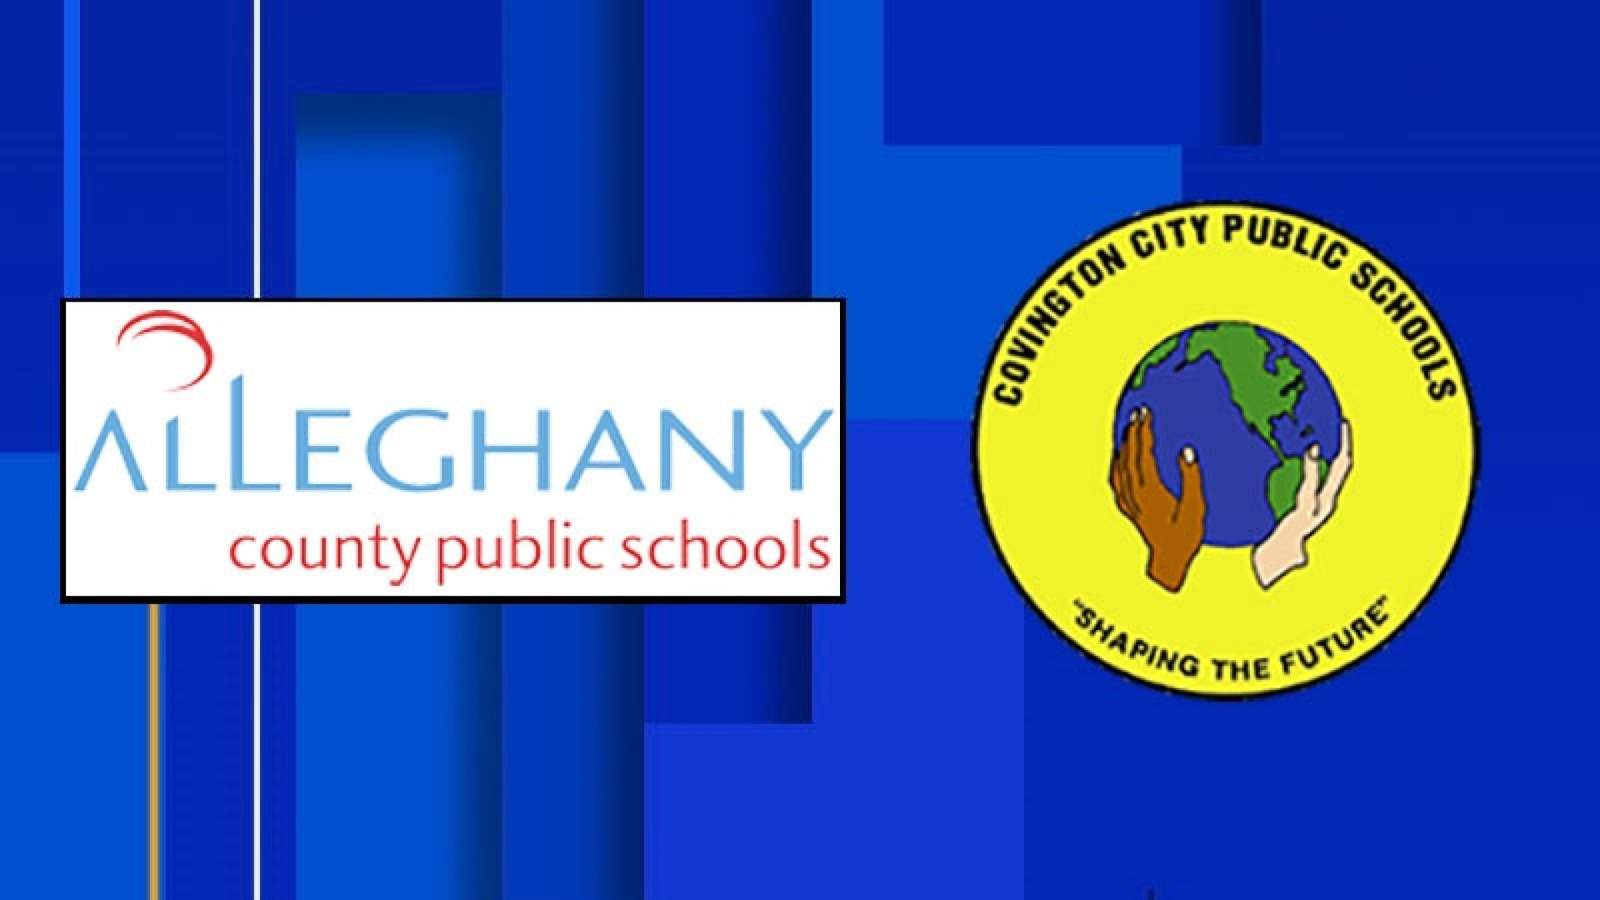 Alleghany County, Covington get state approval to consolidate school systems